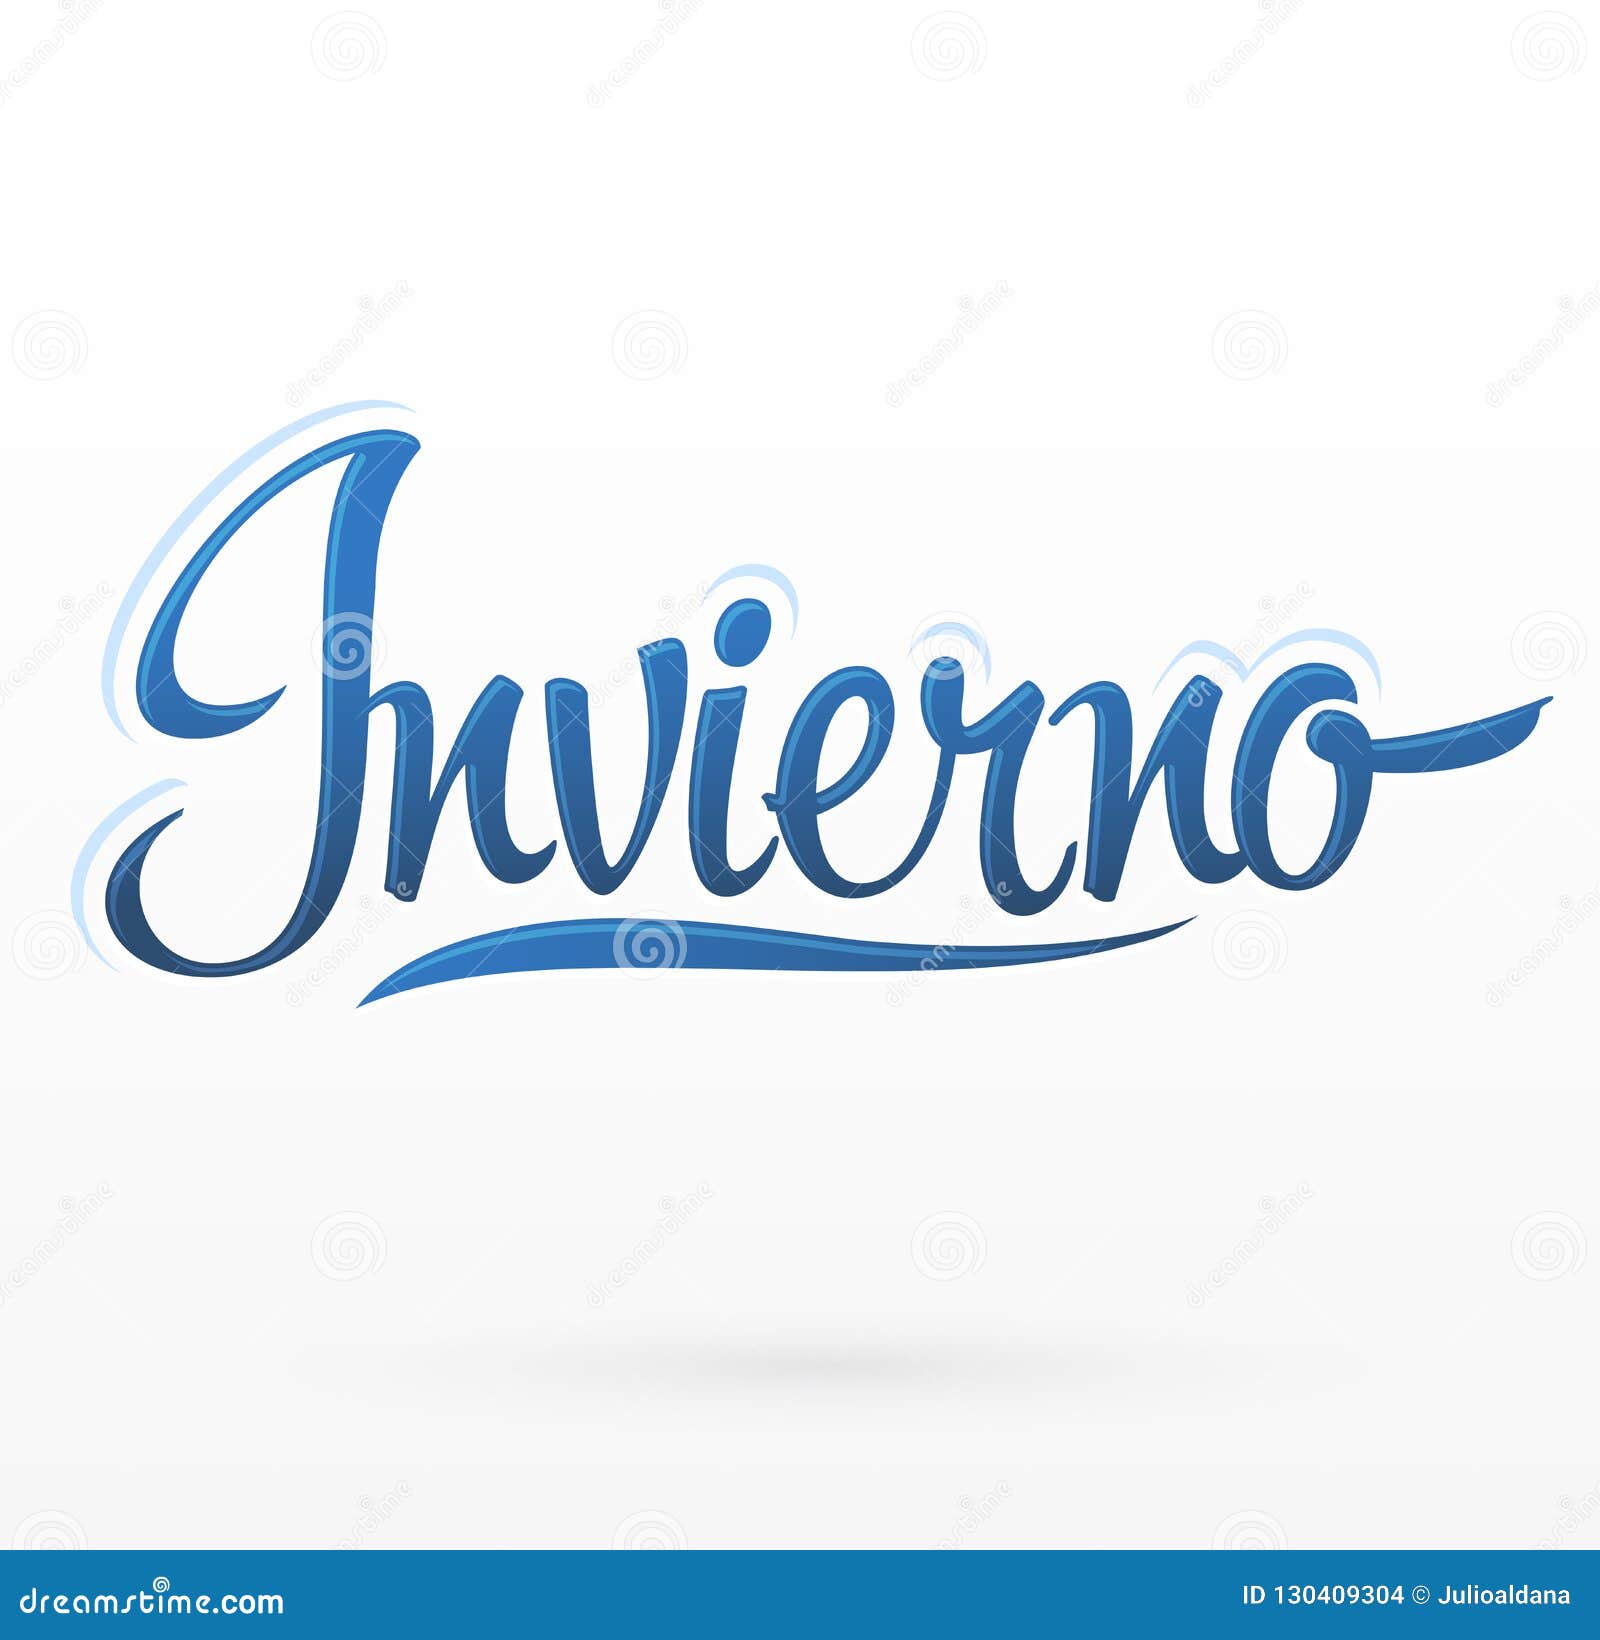 invierno, winter spanish text,  lettering 